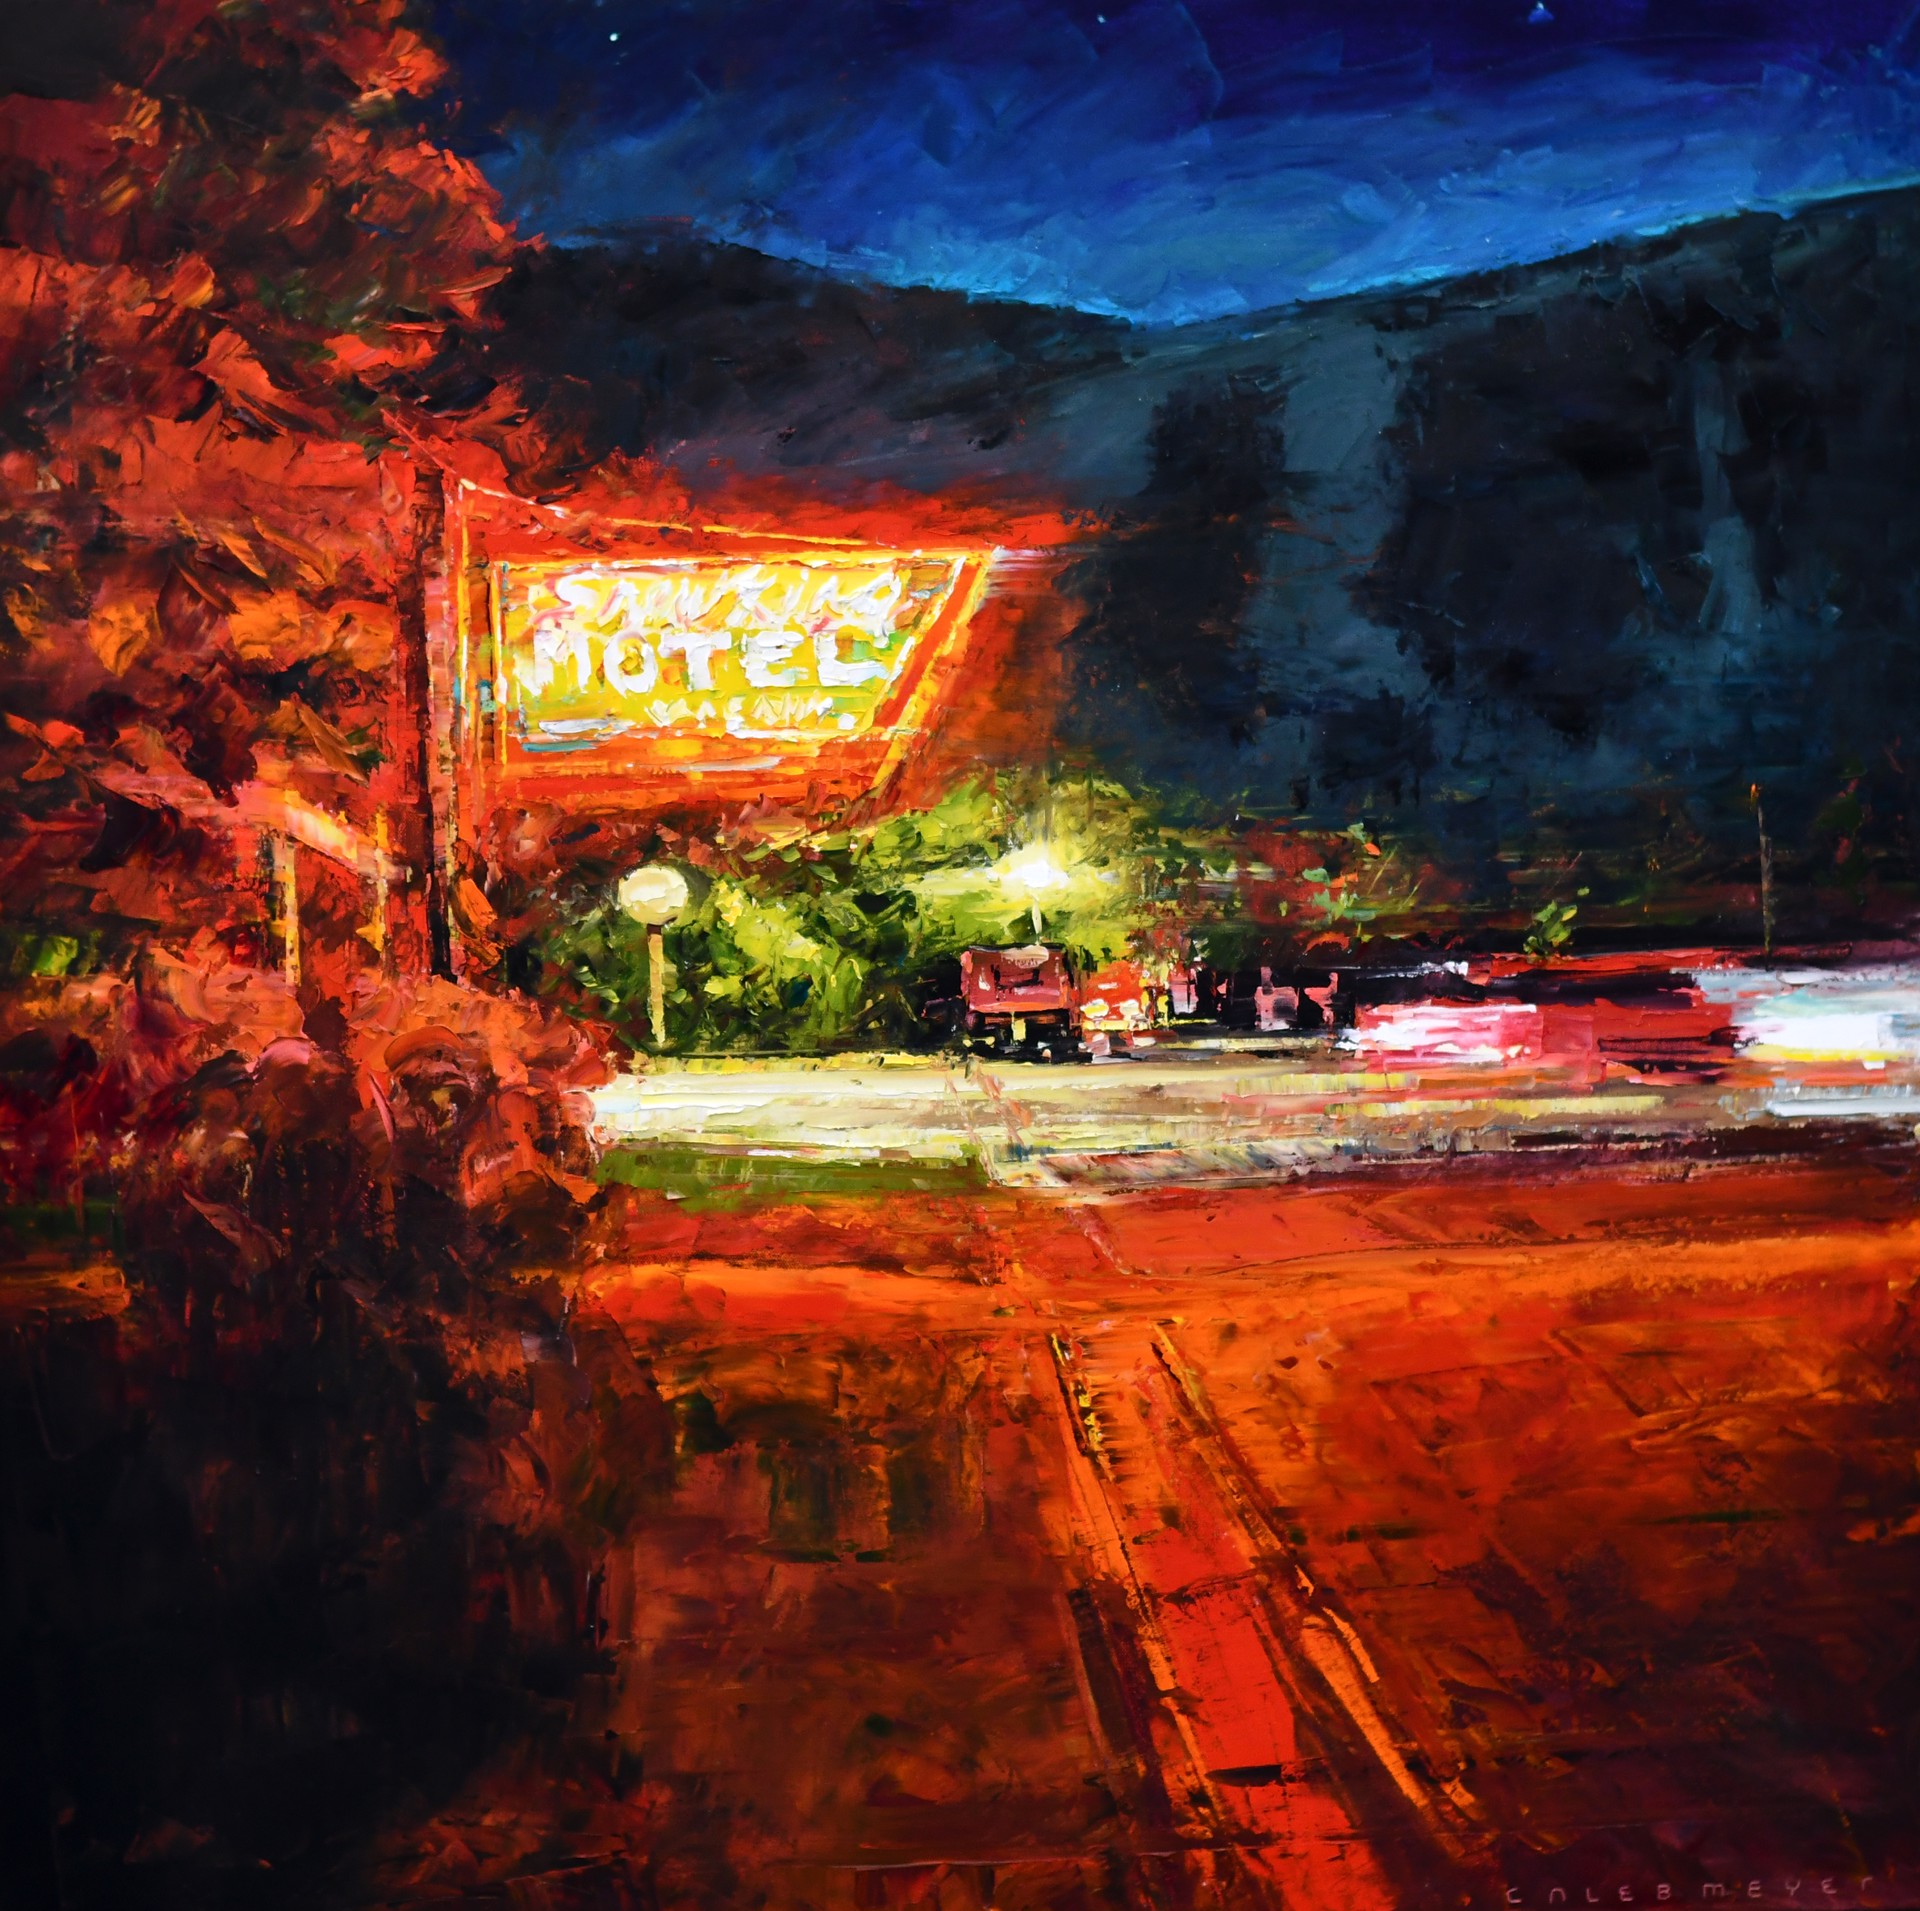 Original Oil Painting Featuring An Evening Landscape Of The Snow King Motel With Neon Lights And Ski Resort In The Background